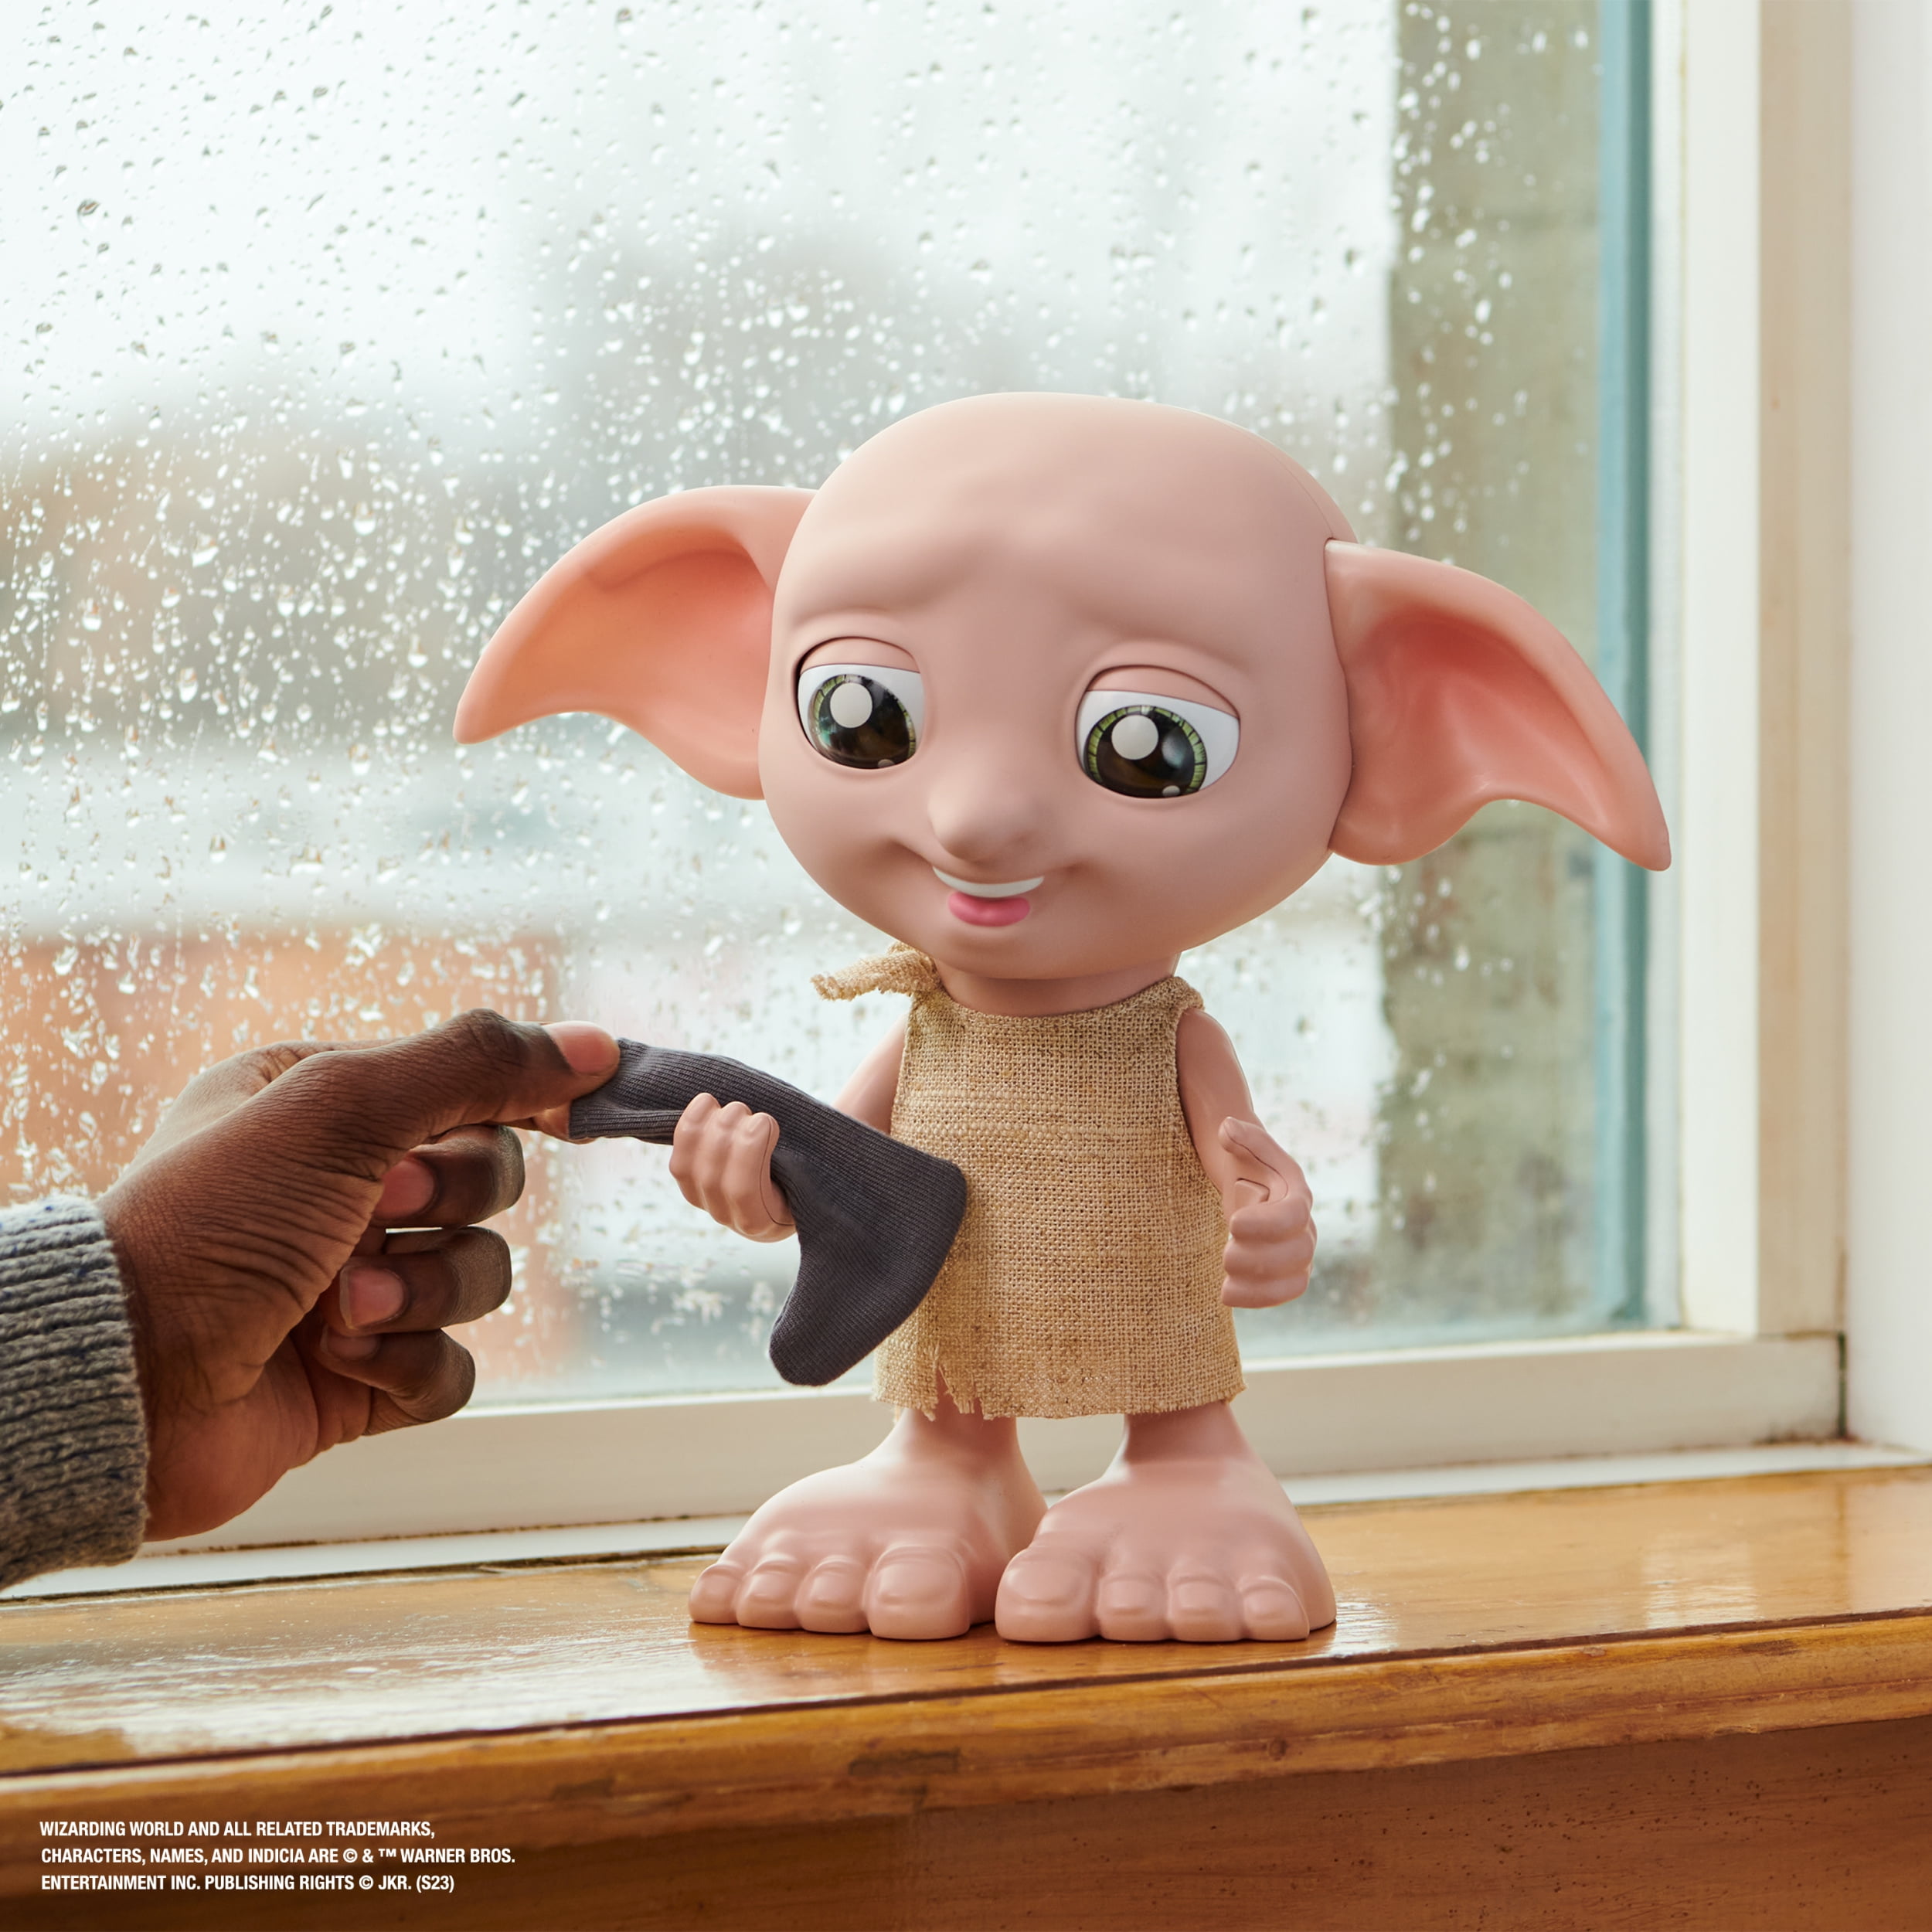 OFFICIAL HARRY POTTER INTERACTIVE TALKING DOBBY THE FREE ELF SOFT